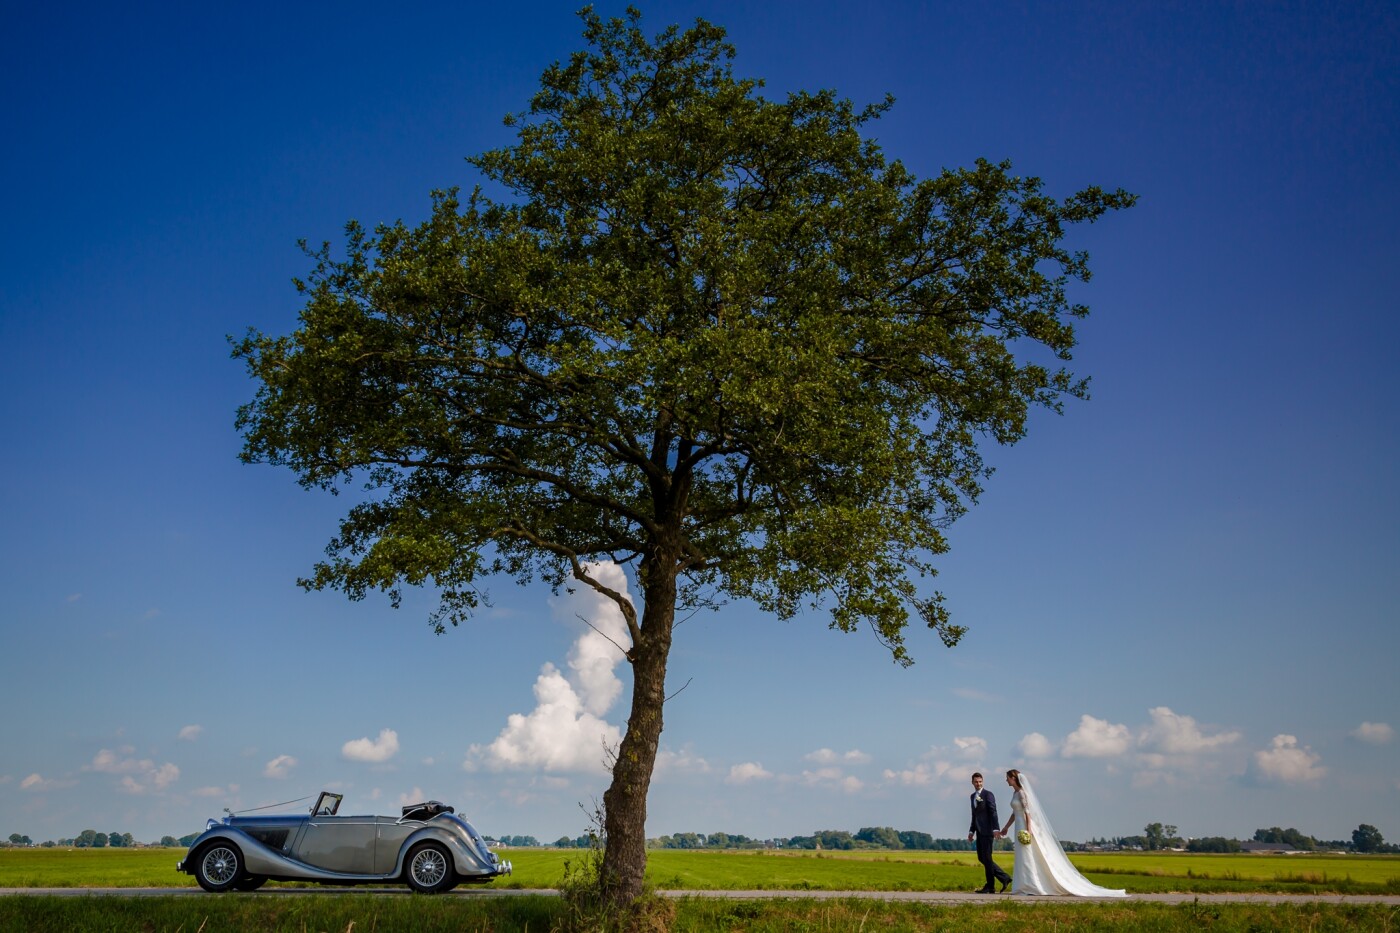 I am a big fan of black and white pictures. But when I pressed the shutter, I already knew that I wouldn't edit this picture in black and white. The great blue sky on a sunny summer morning. The beautiful lonely green tree. The classic cabriolet and ... the stunning wedding couple. A great mix of colors and elements.